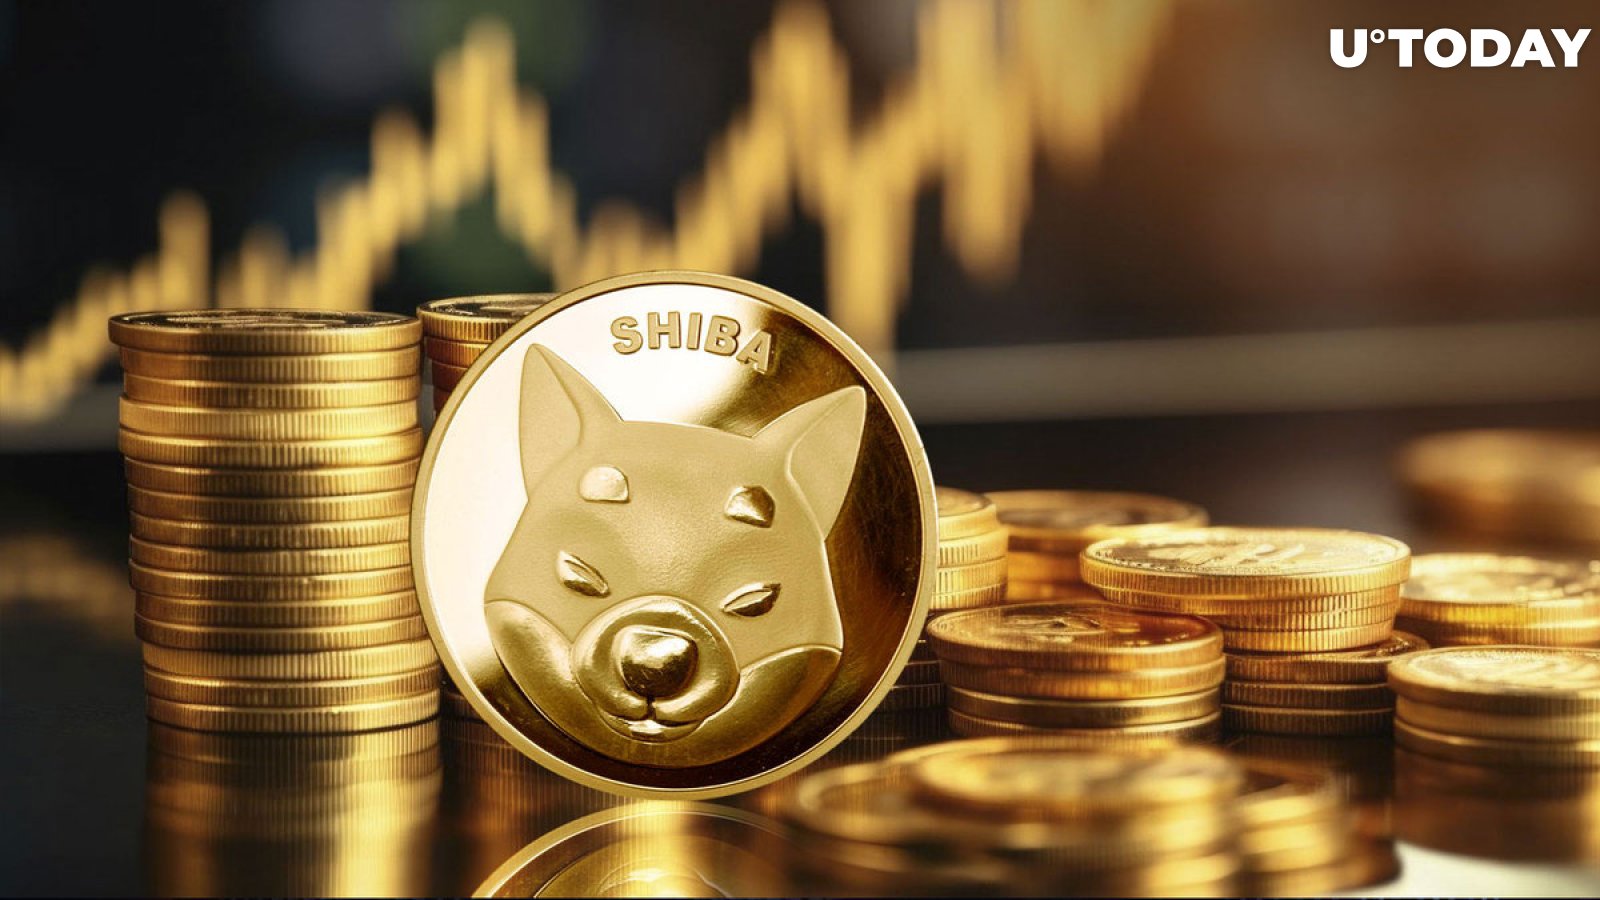 Early SHIB Trillionaire Holder Takes Profit From 300% Shiba Inu Price Jump